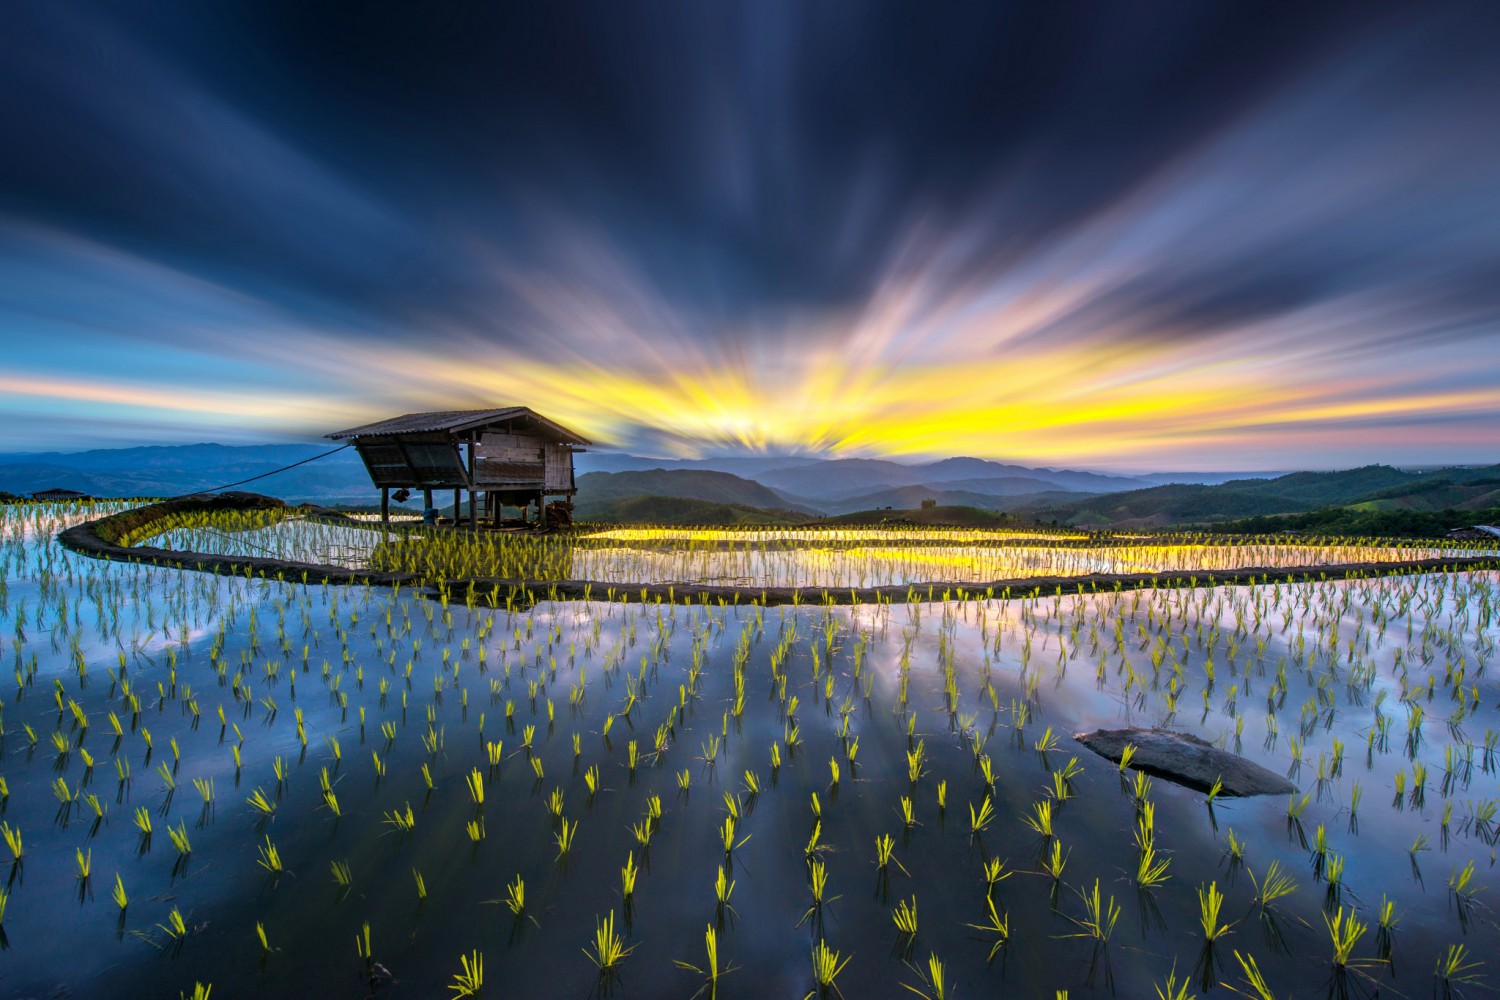 Guest Curator Sarawut Intarob Shares Four 500px Photos that Take His Breath Away